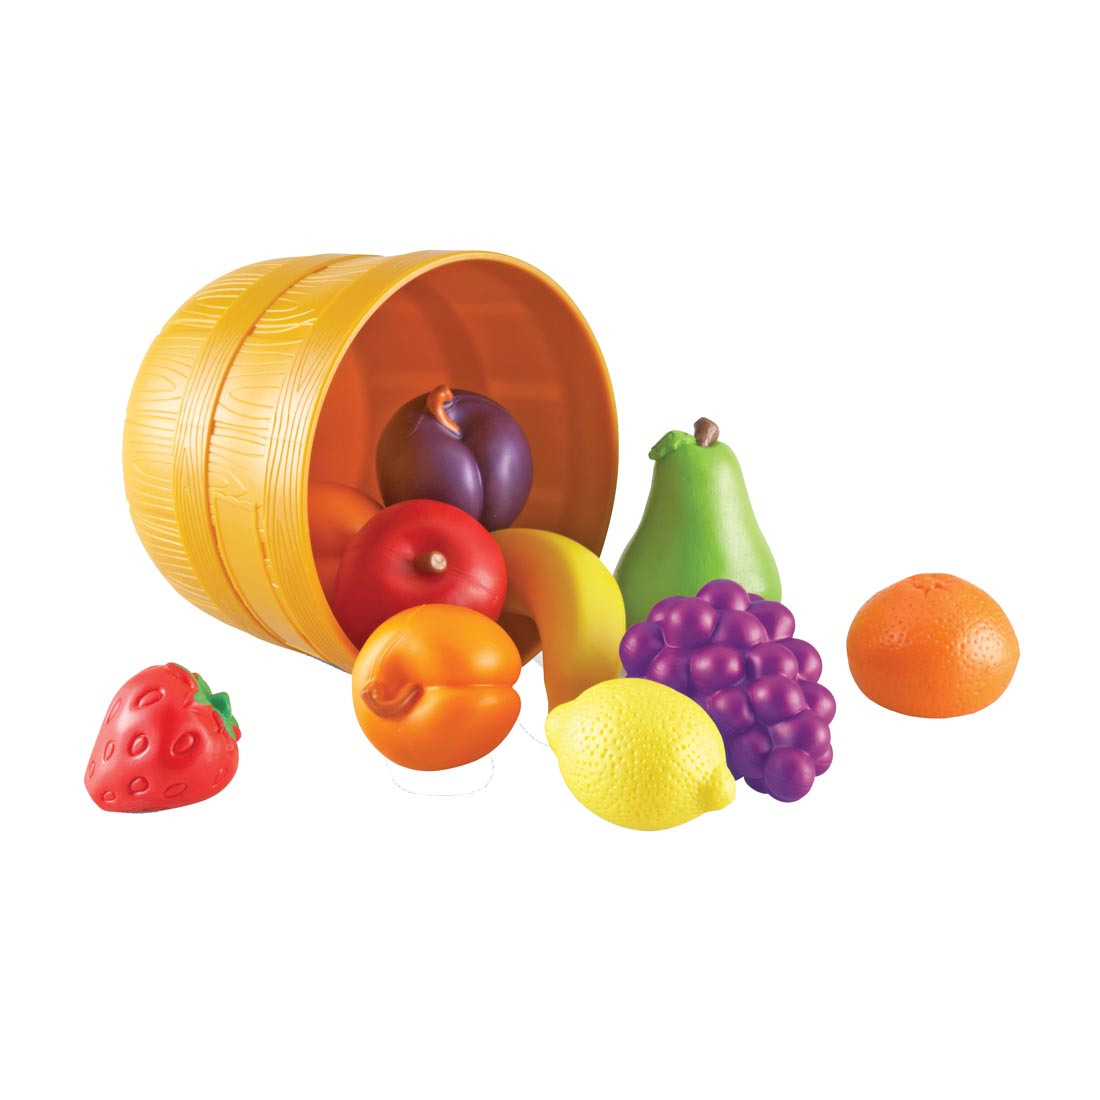 toy bushel basket tipped over to spill out colorful plastic fruit